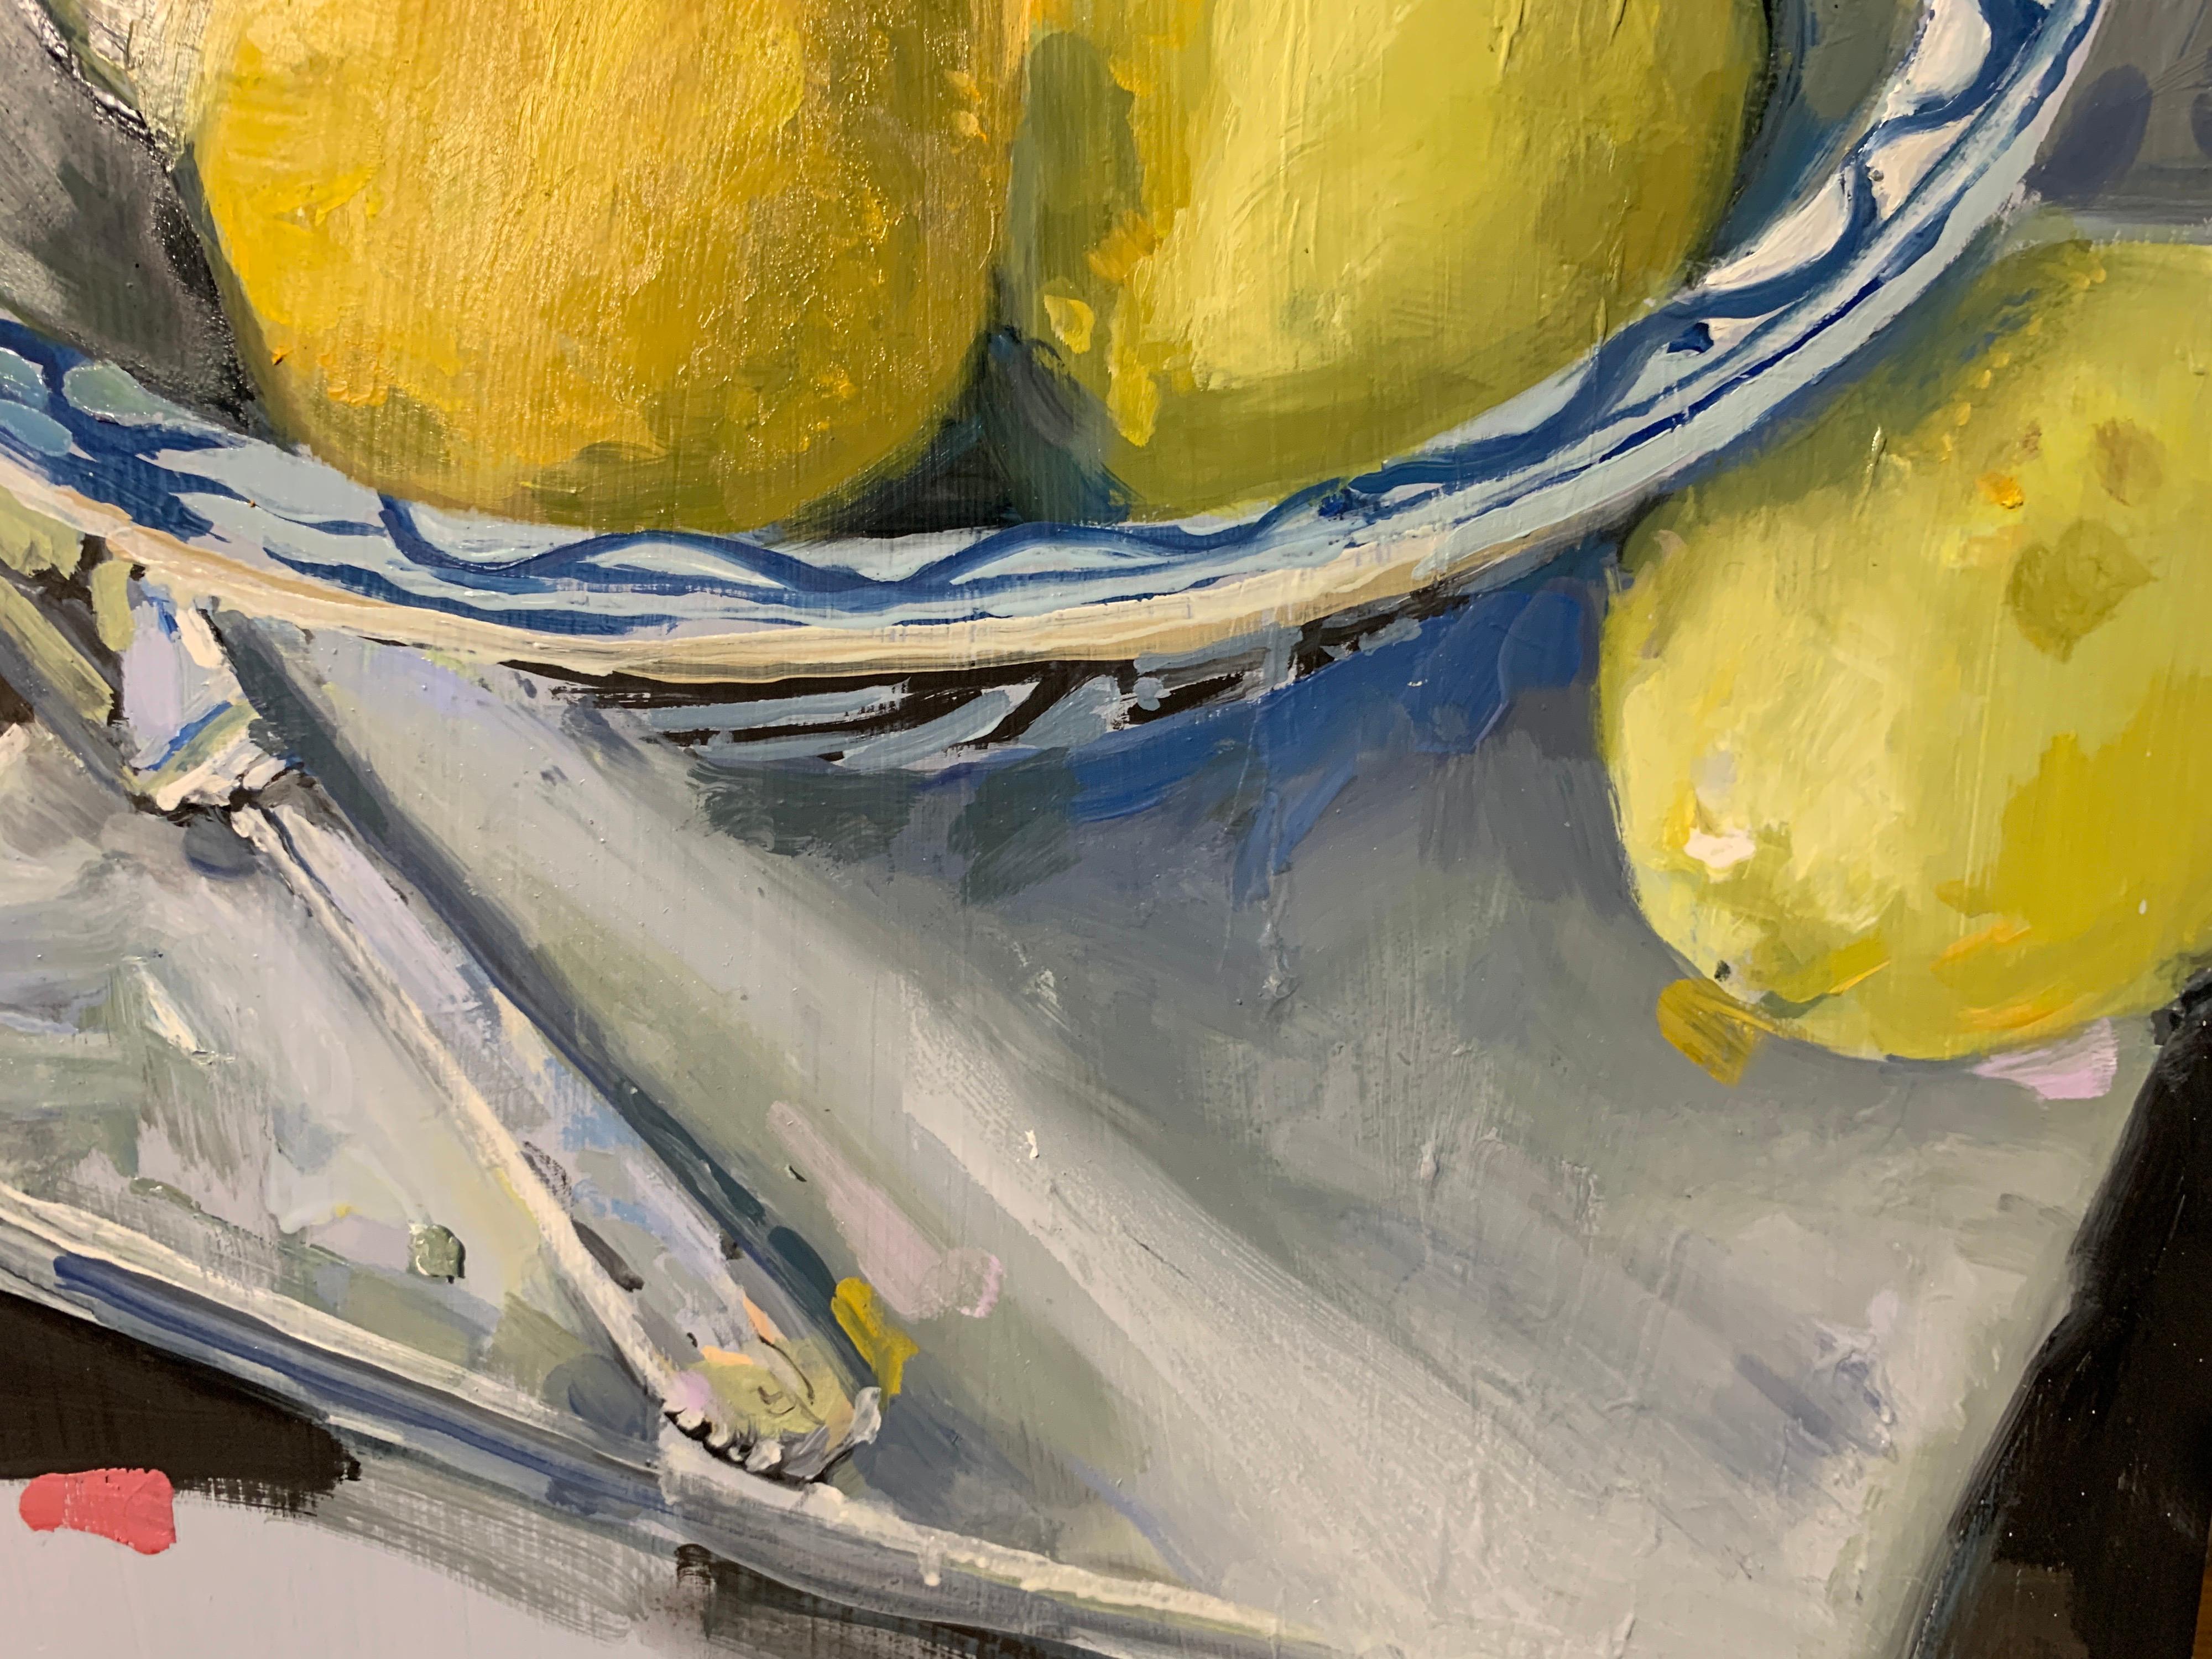 Lemons in a Blue and White Bowl by Laura Shubert, Petite Oil on Board Still Life - Impressionist Painting by Laura Lacambra Shubert